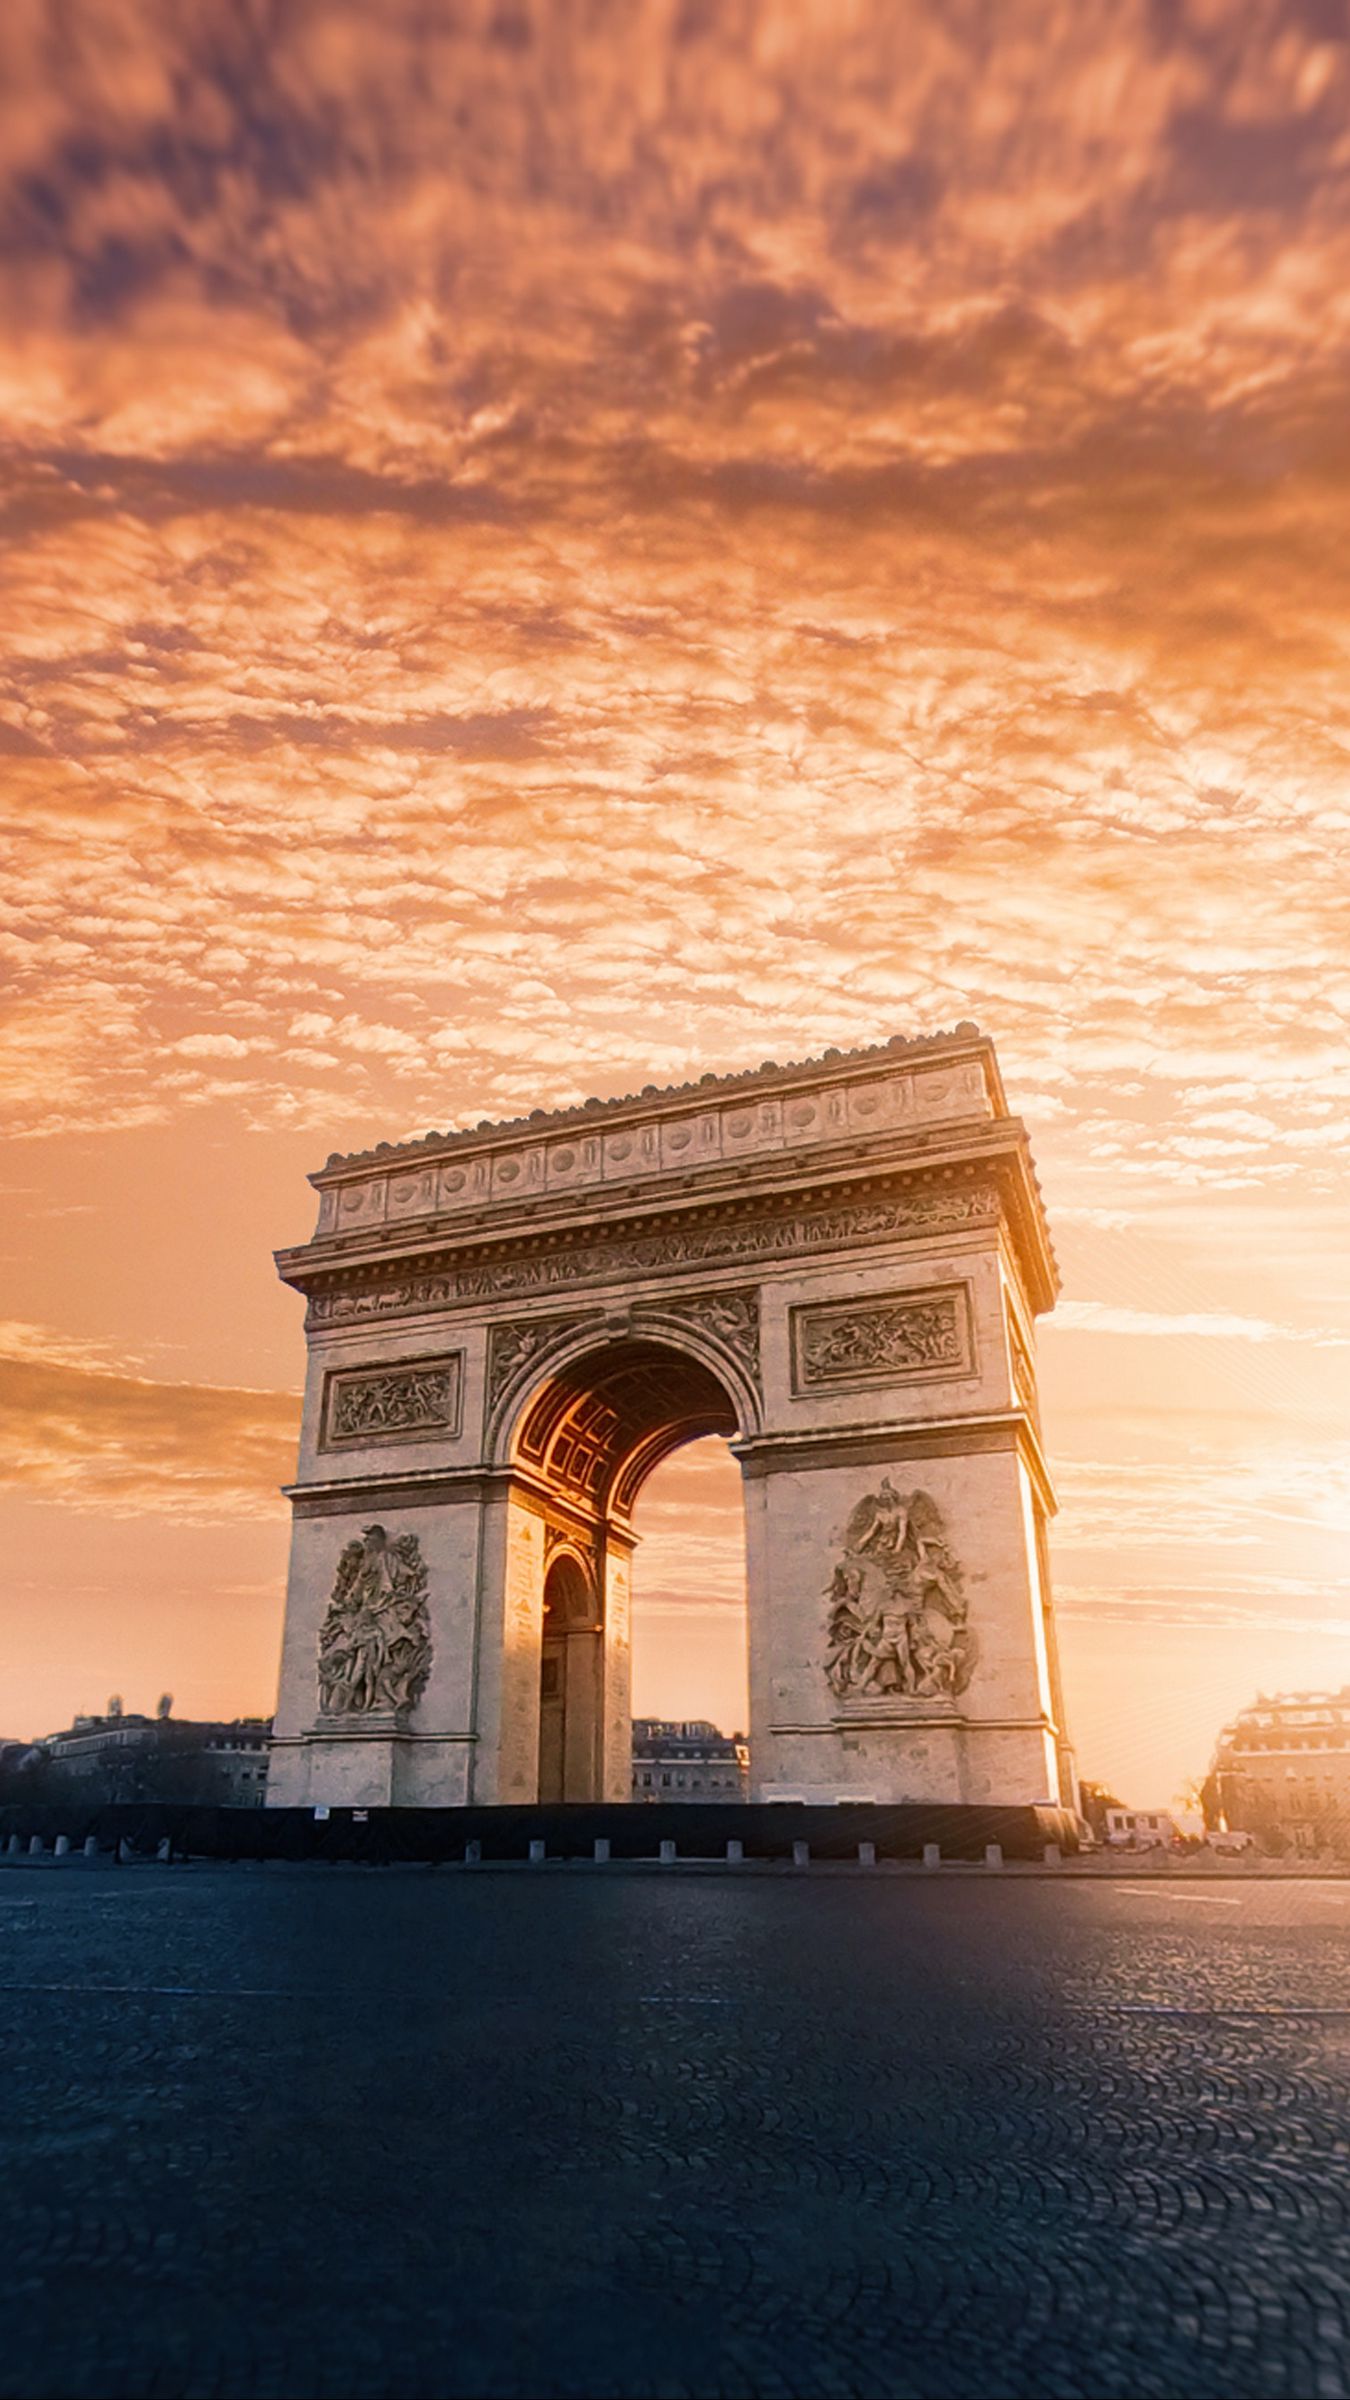 Sunset Paris France iPhone Wallpapers Free Download